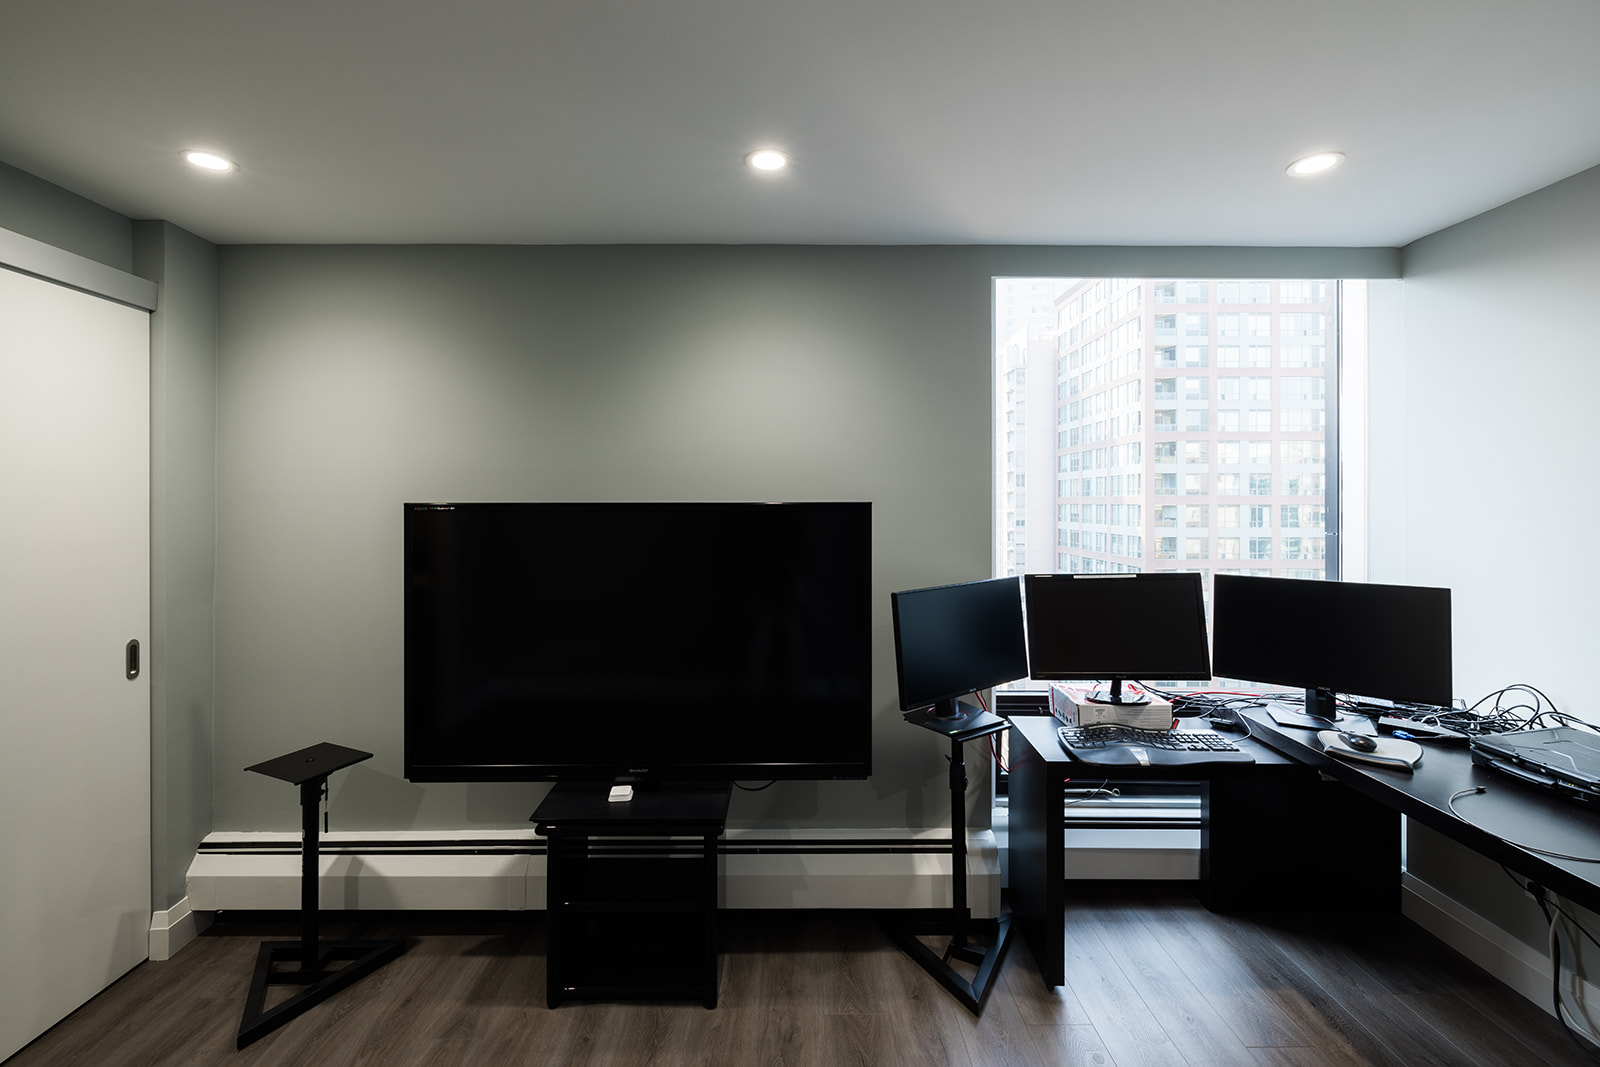 Flex room in downtown Toronto full condo renovation with recessed lighting